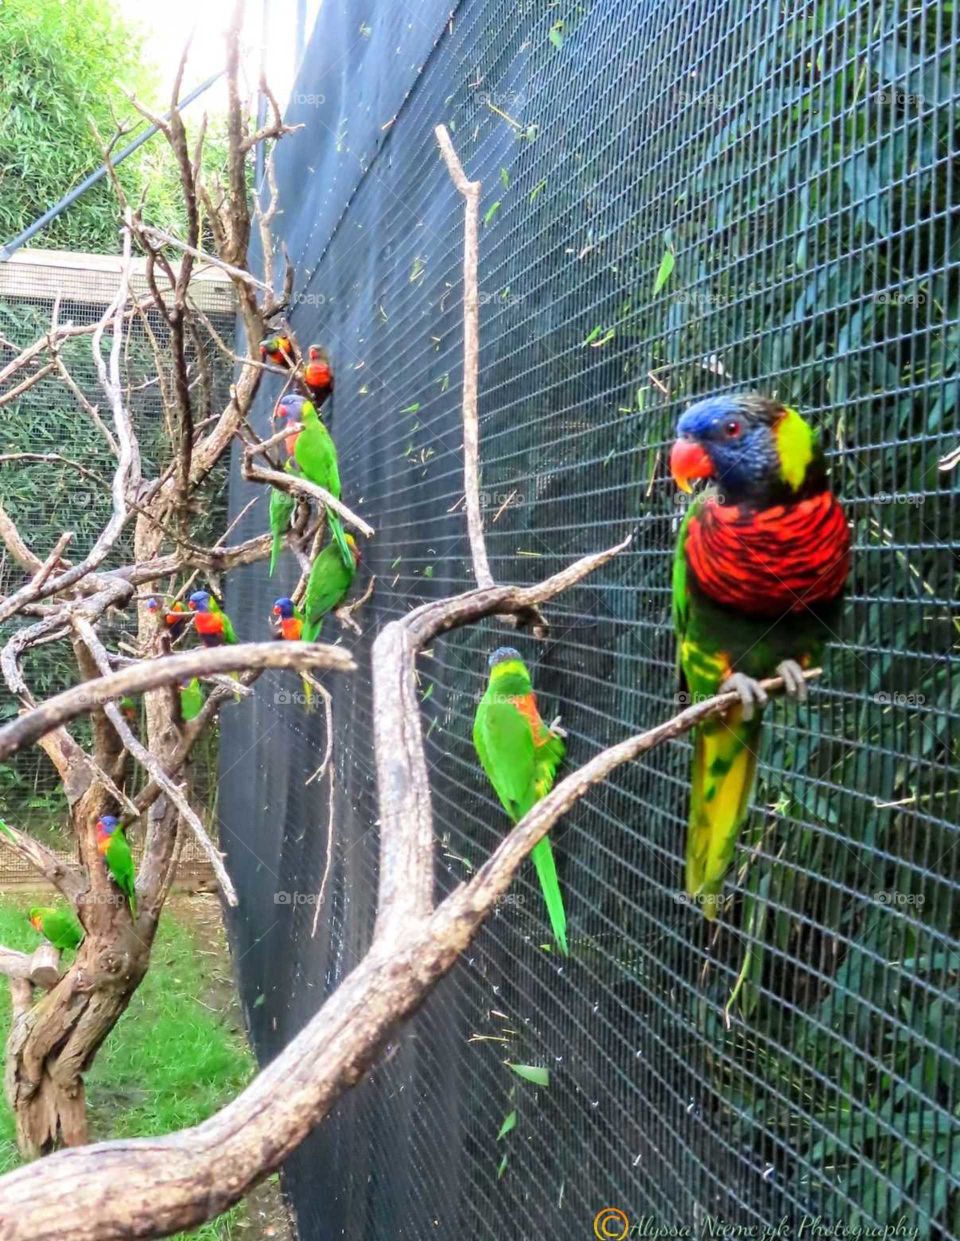 Absolutely stunning birds! Colors are phenomenal, super friendly "Smooth Jazzy Colored Birds". Love being fed!